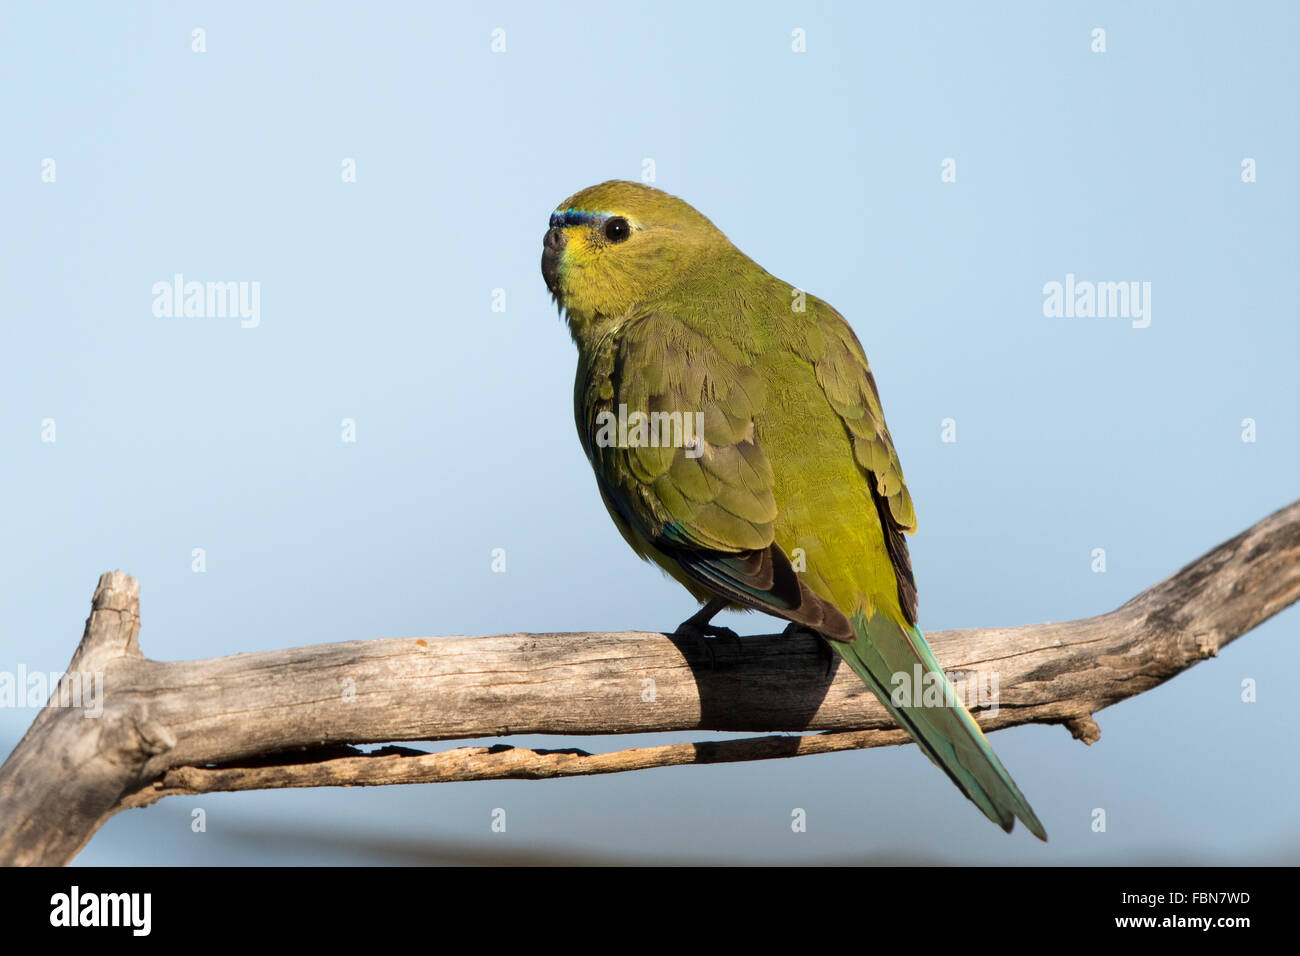 Colorful turquoise and green feathers on parrot's wing, Key West, Florida,  USA Stock Photo - Alamy